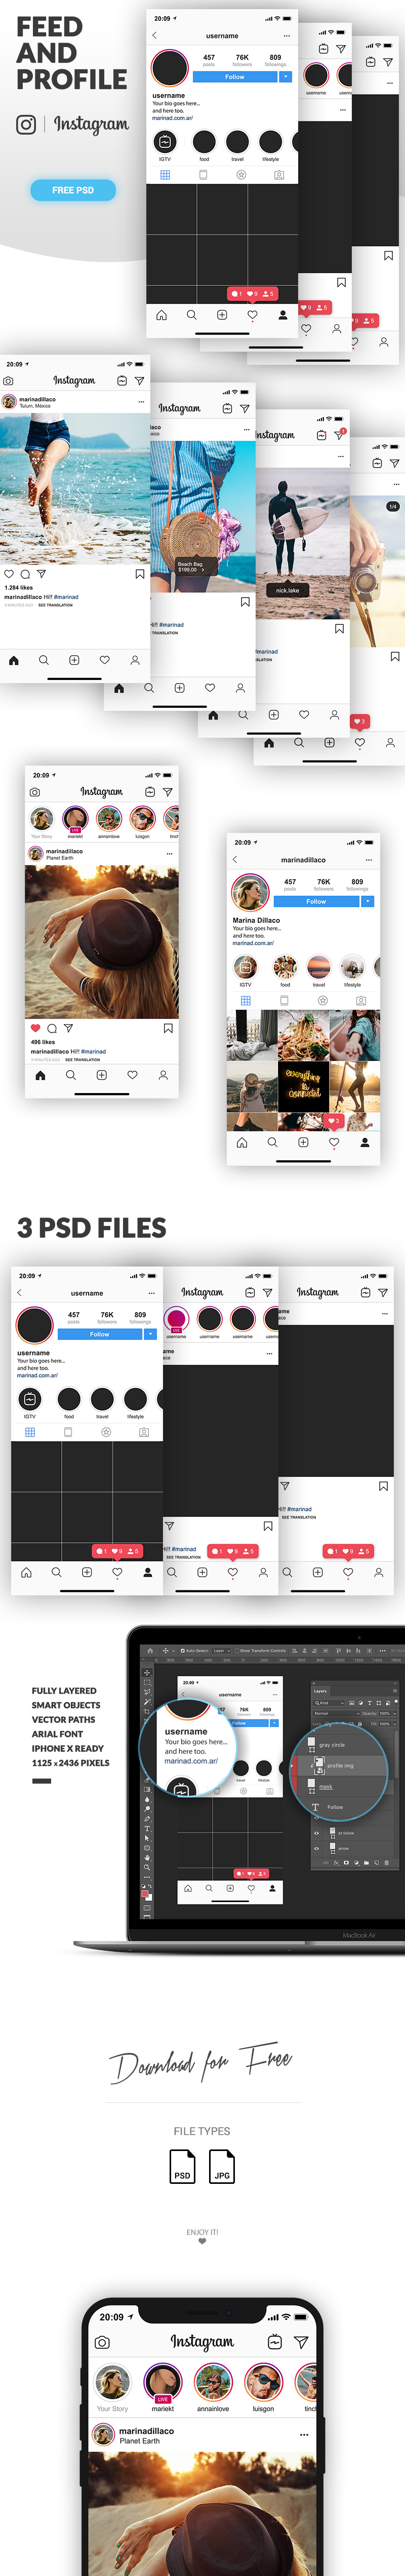 Download FREE Instagram Feed and Profile PSD UI – 2019 – MarinaD PSD Mockup Templates